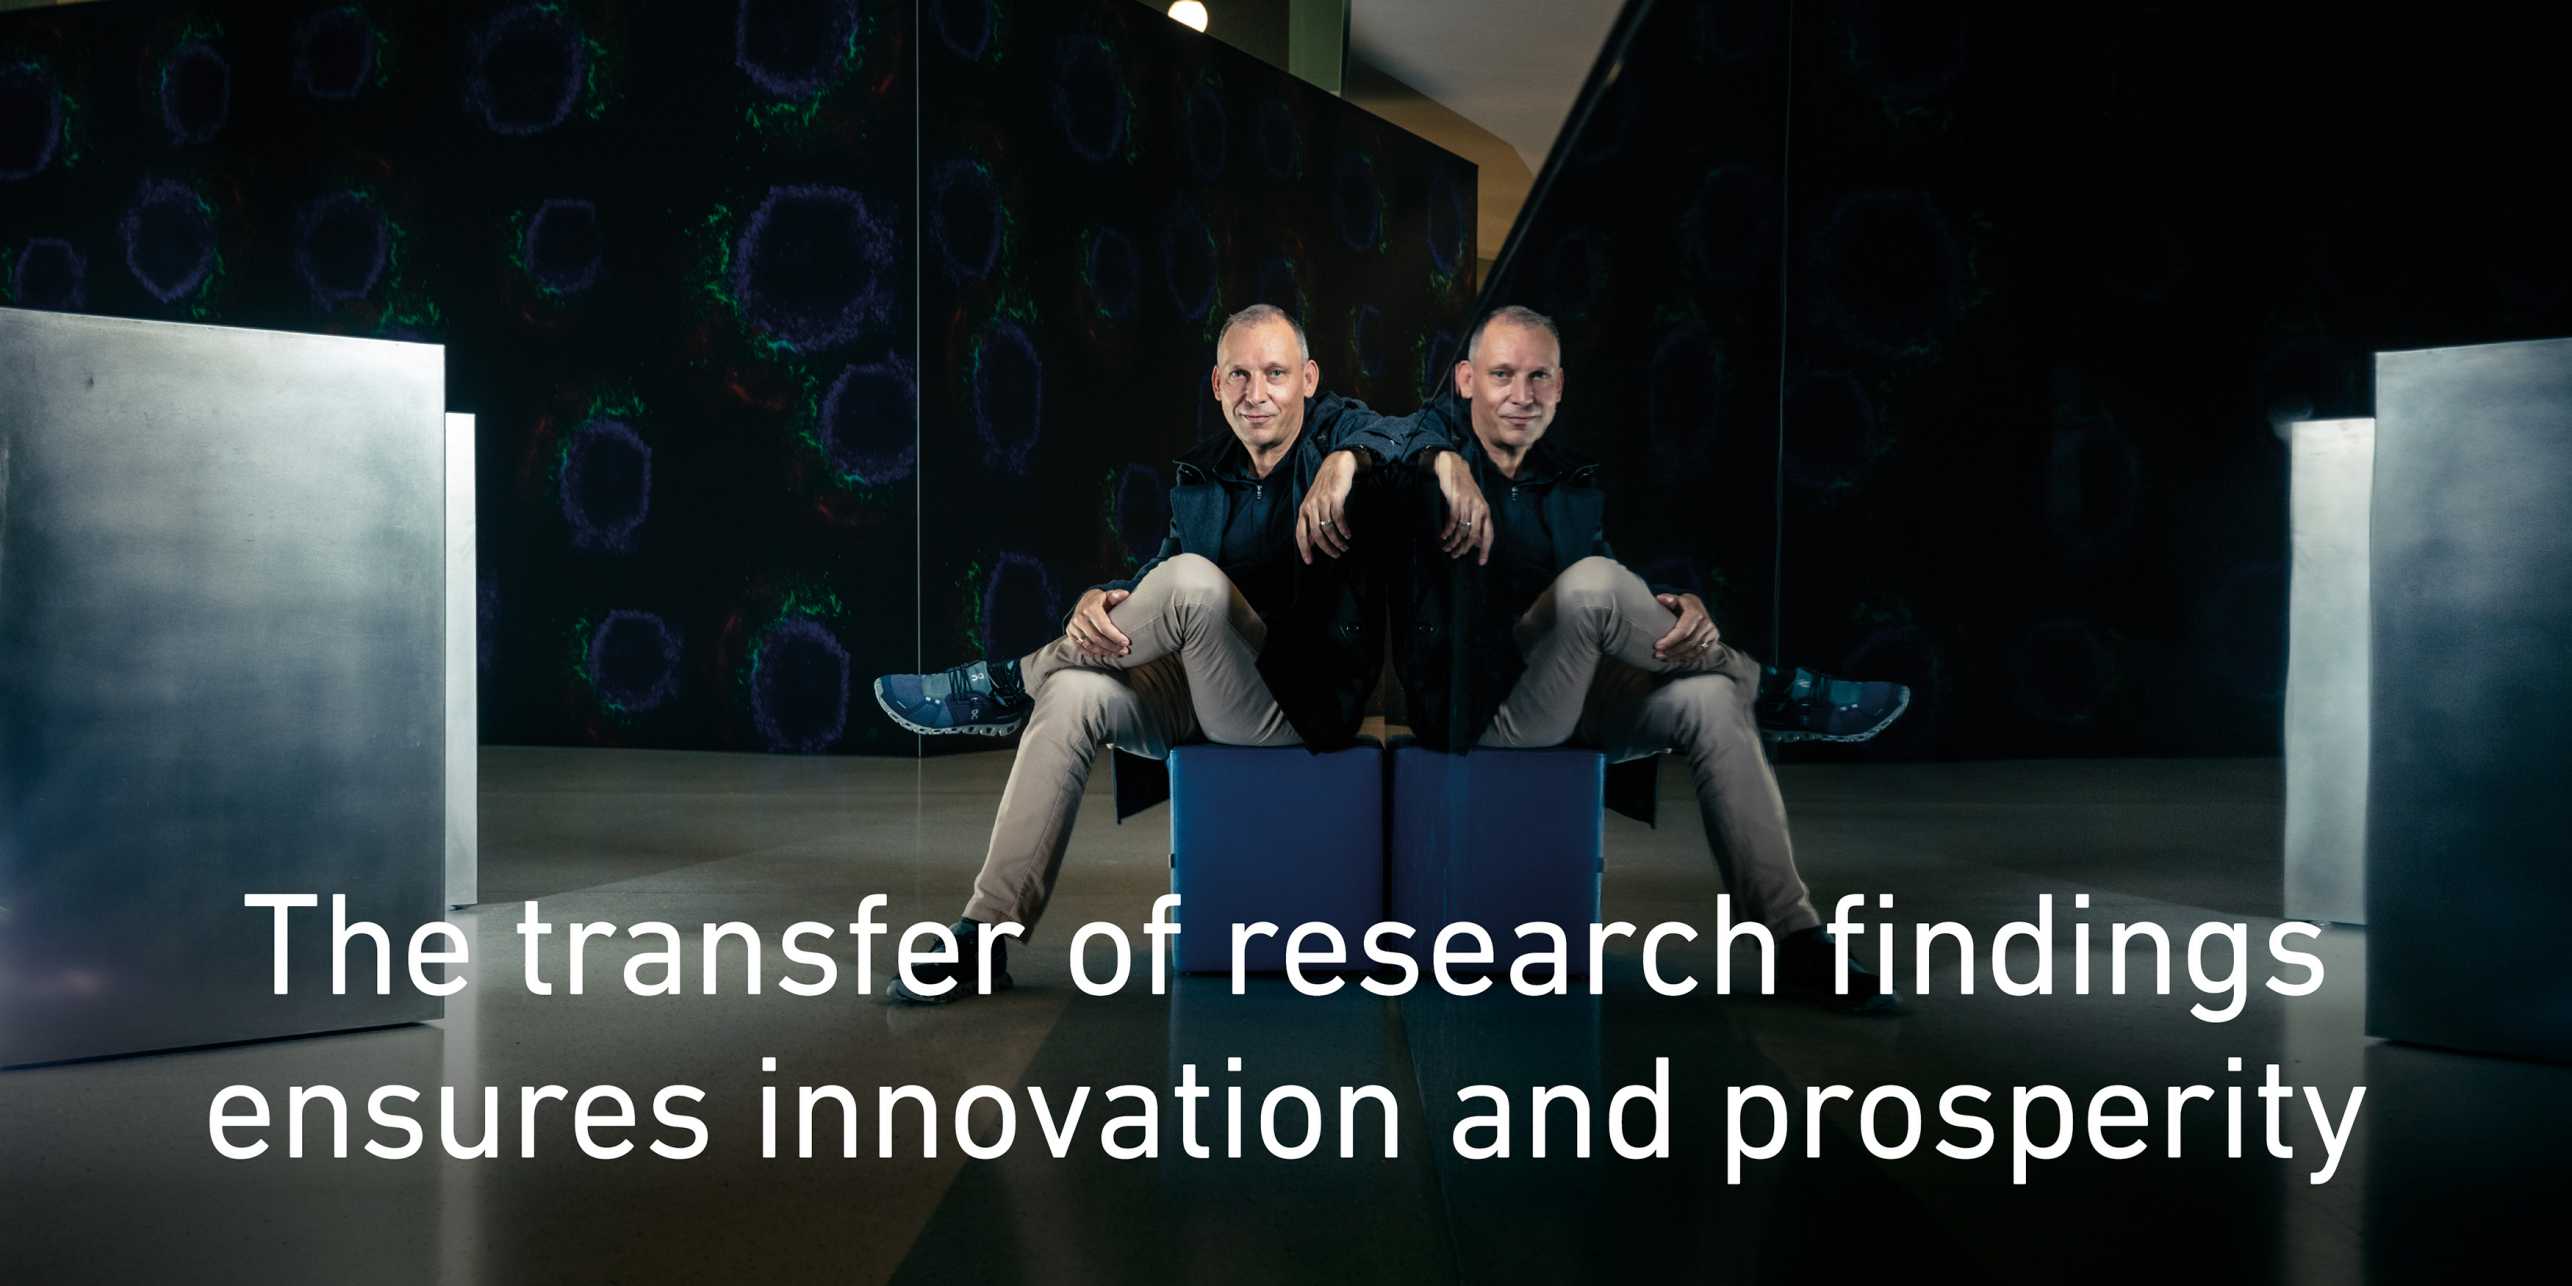 The transfer of research findings ensures innovation and prosperity. Link to news article: Former NASA Science Director is joining ETH Zurich